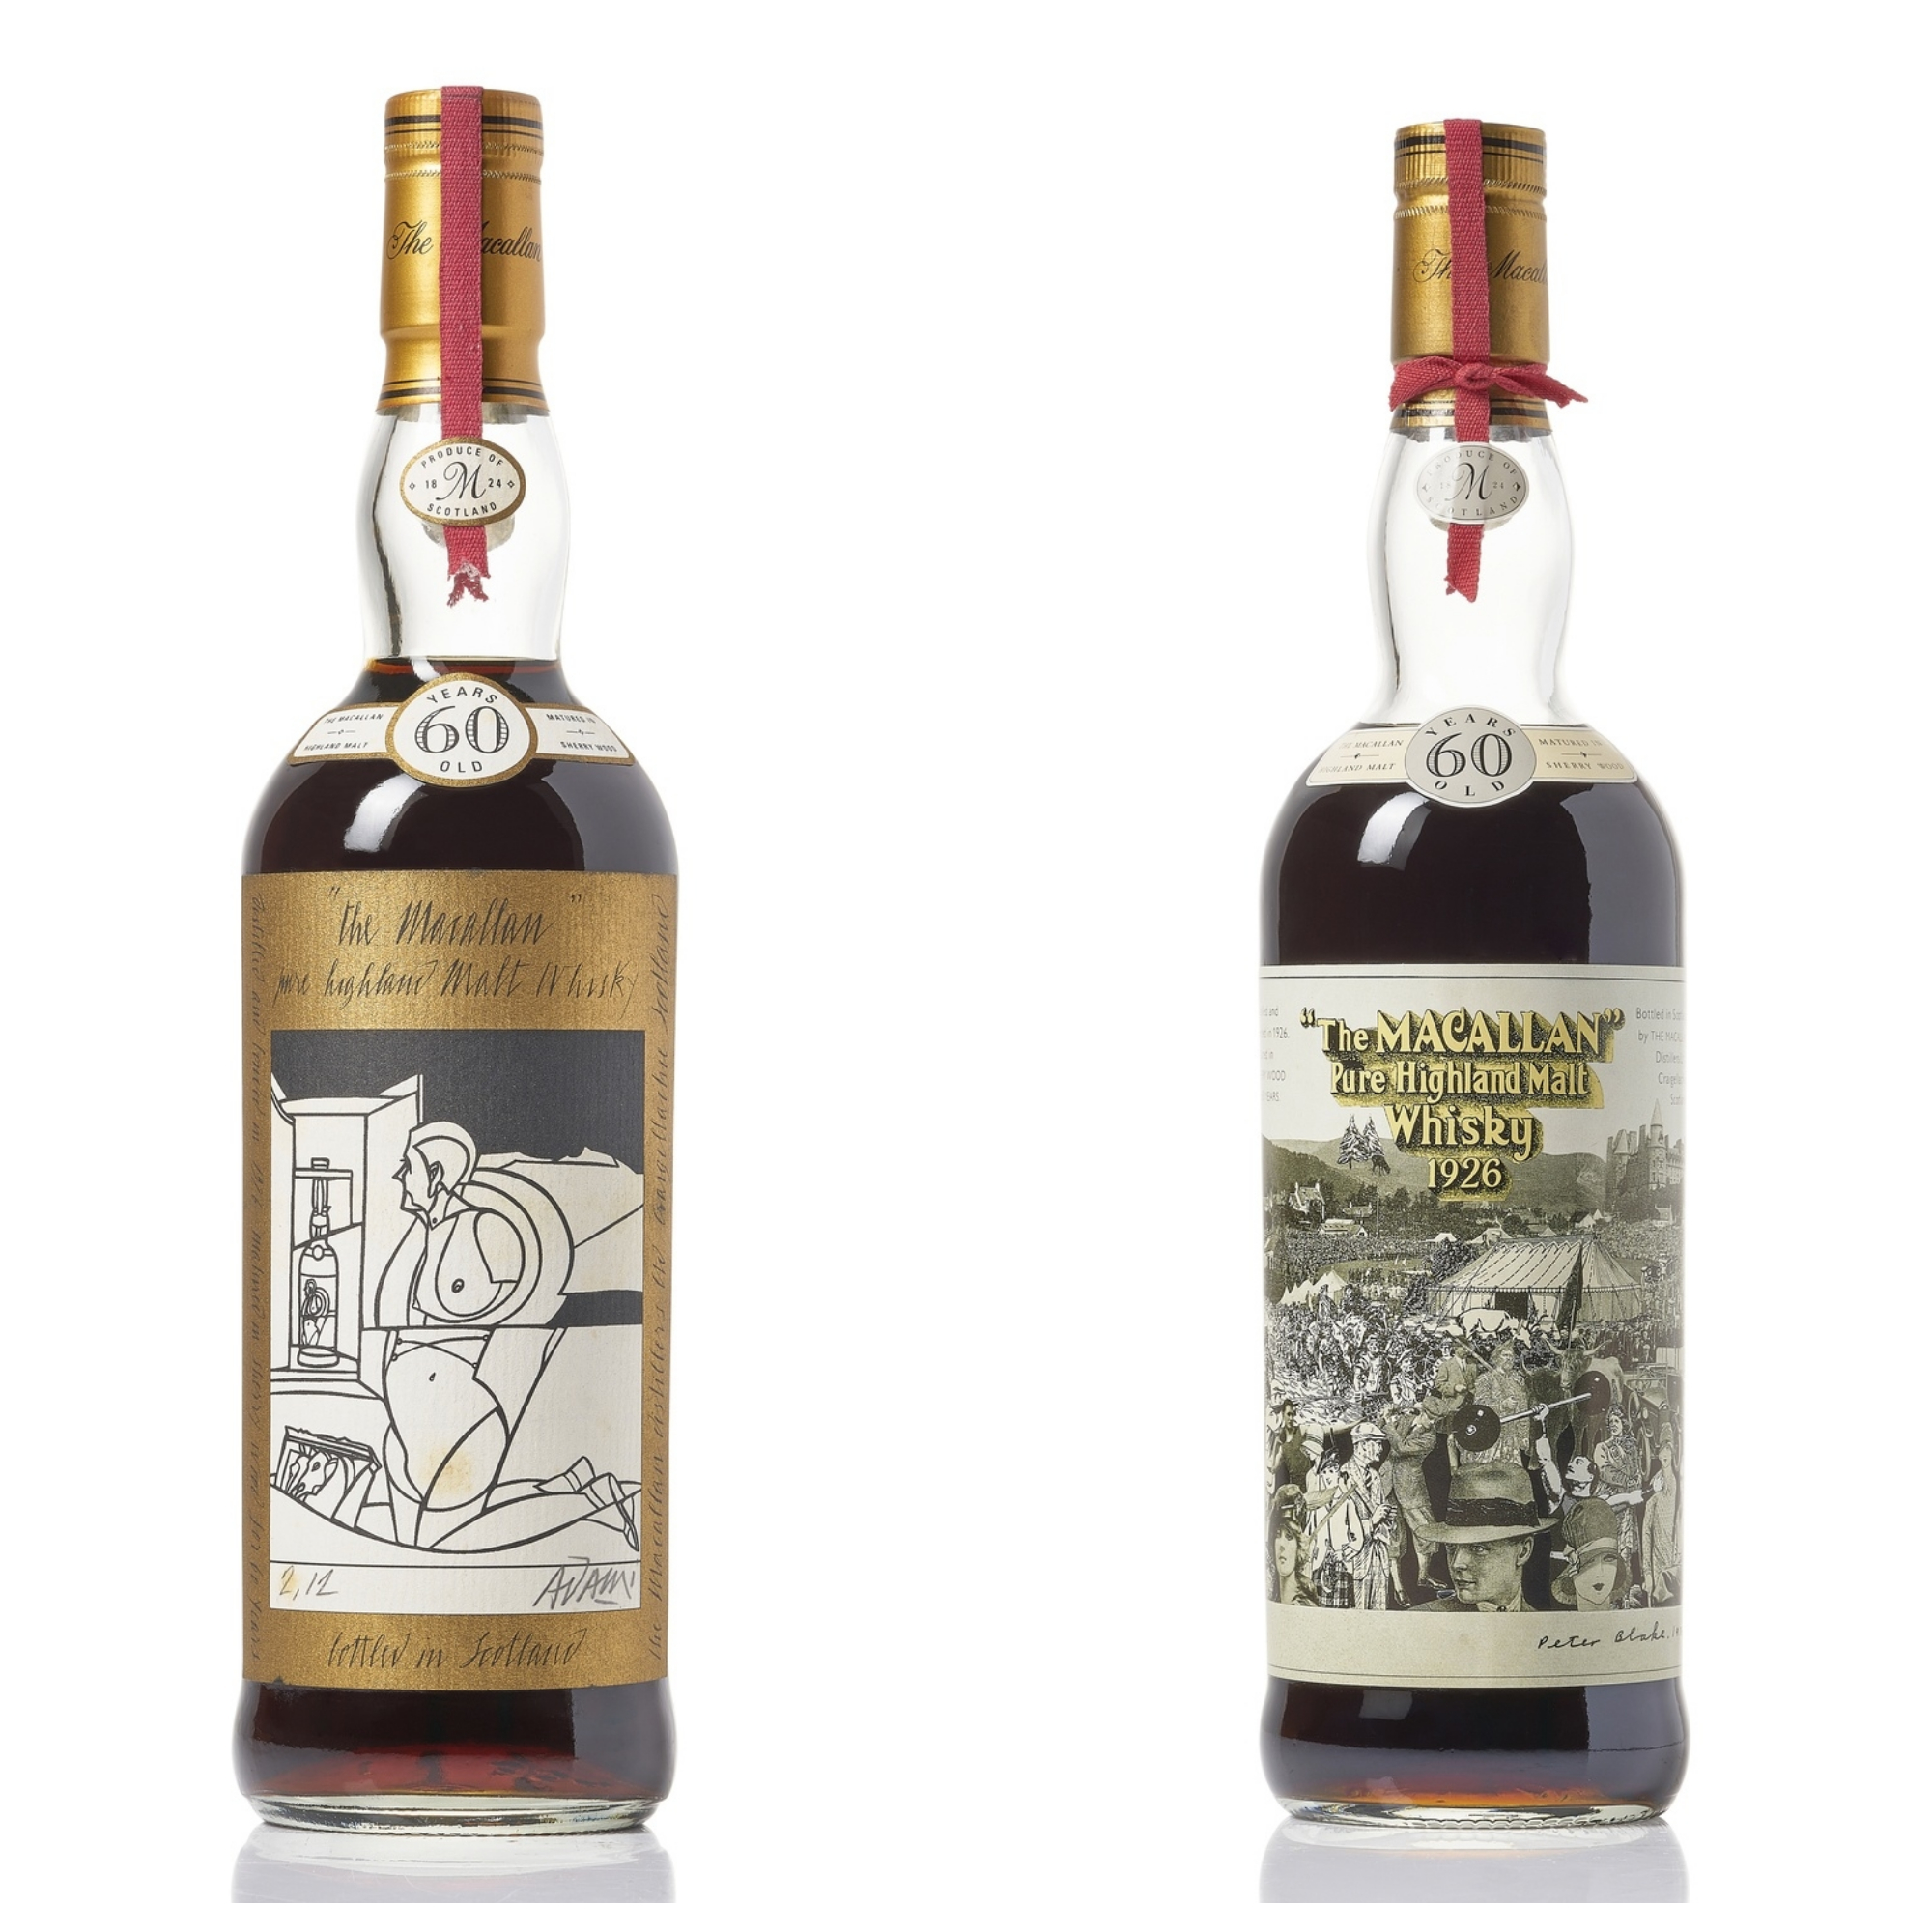 Auctioneers Bonhams say the vintage Macallan bottles have been unseen in public since they were sold over three decades ago.